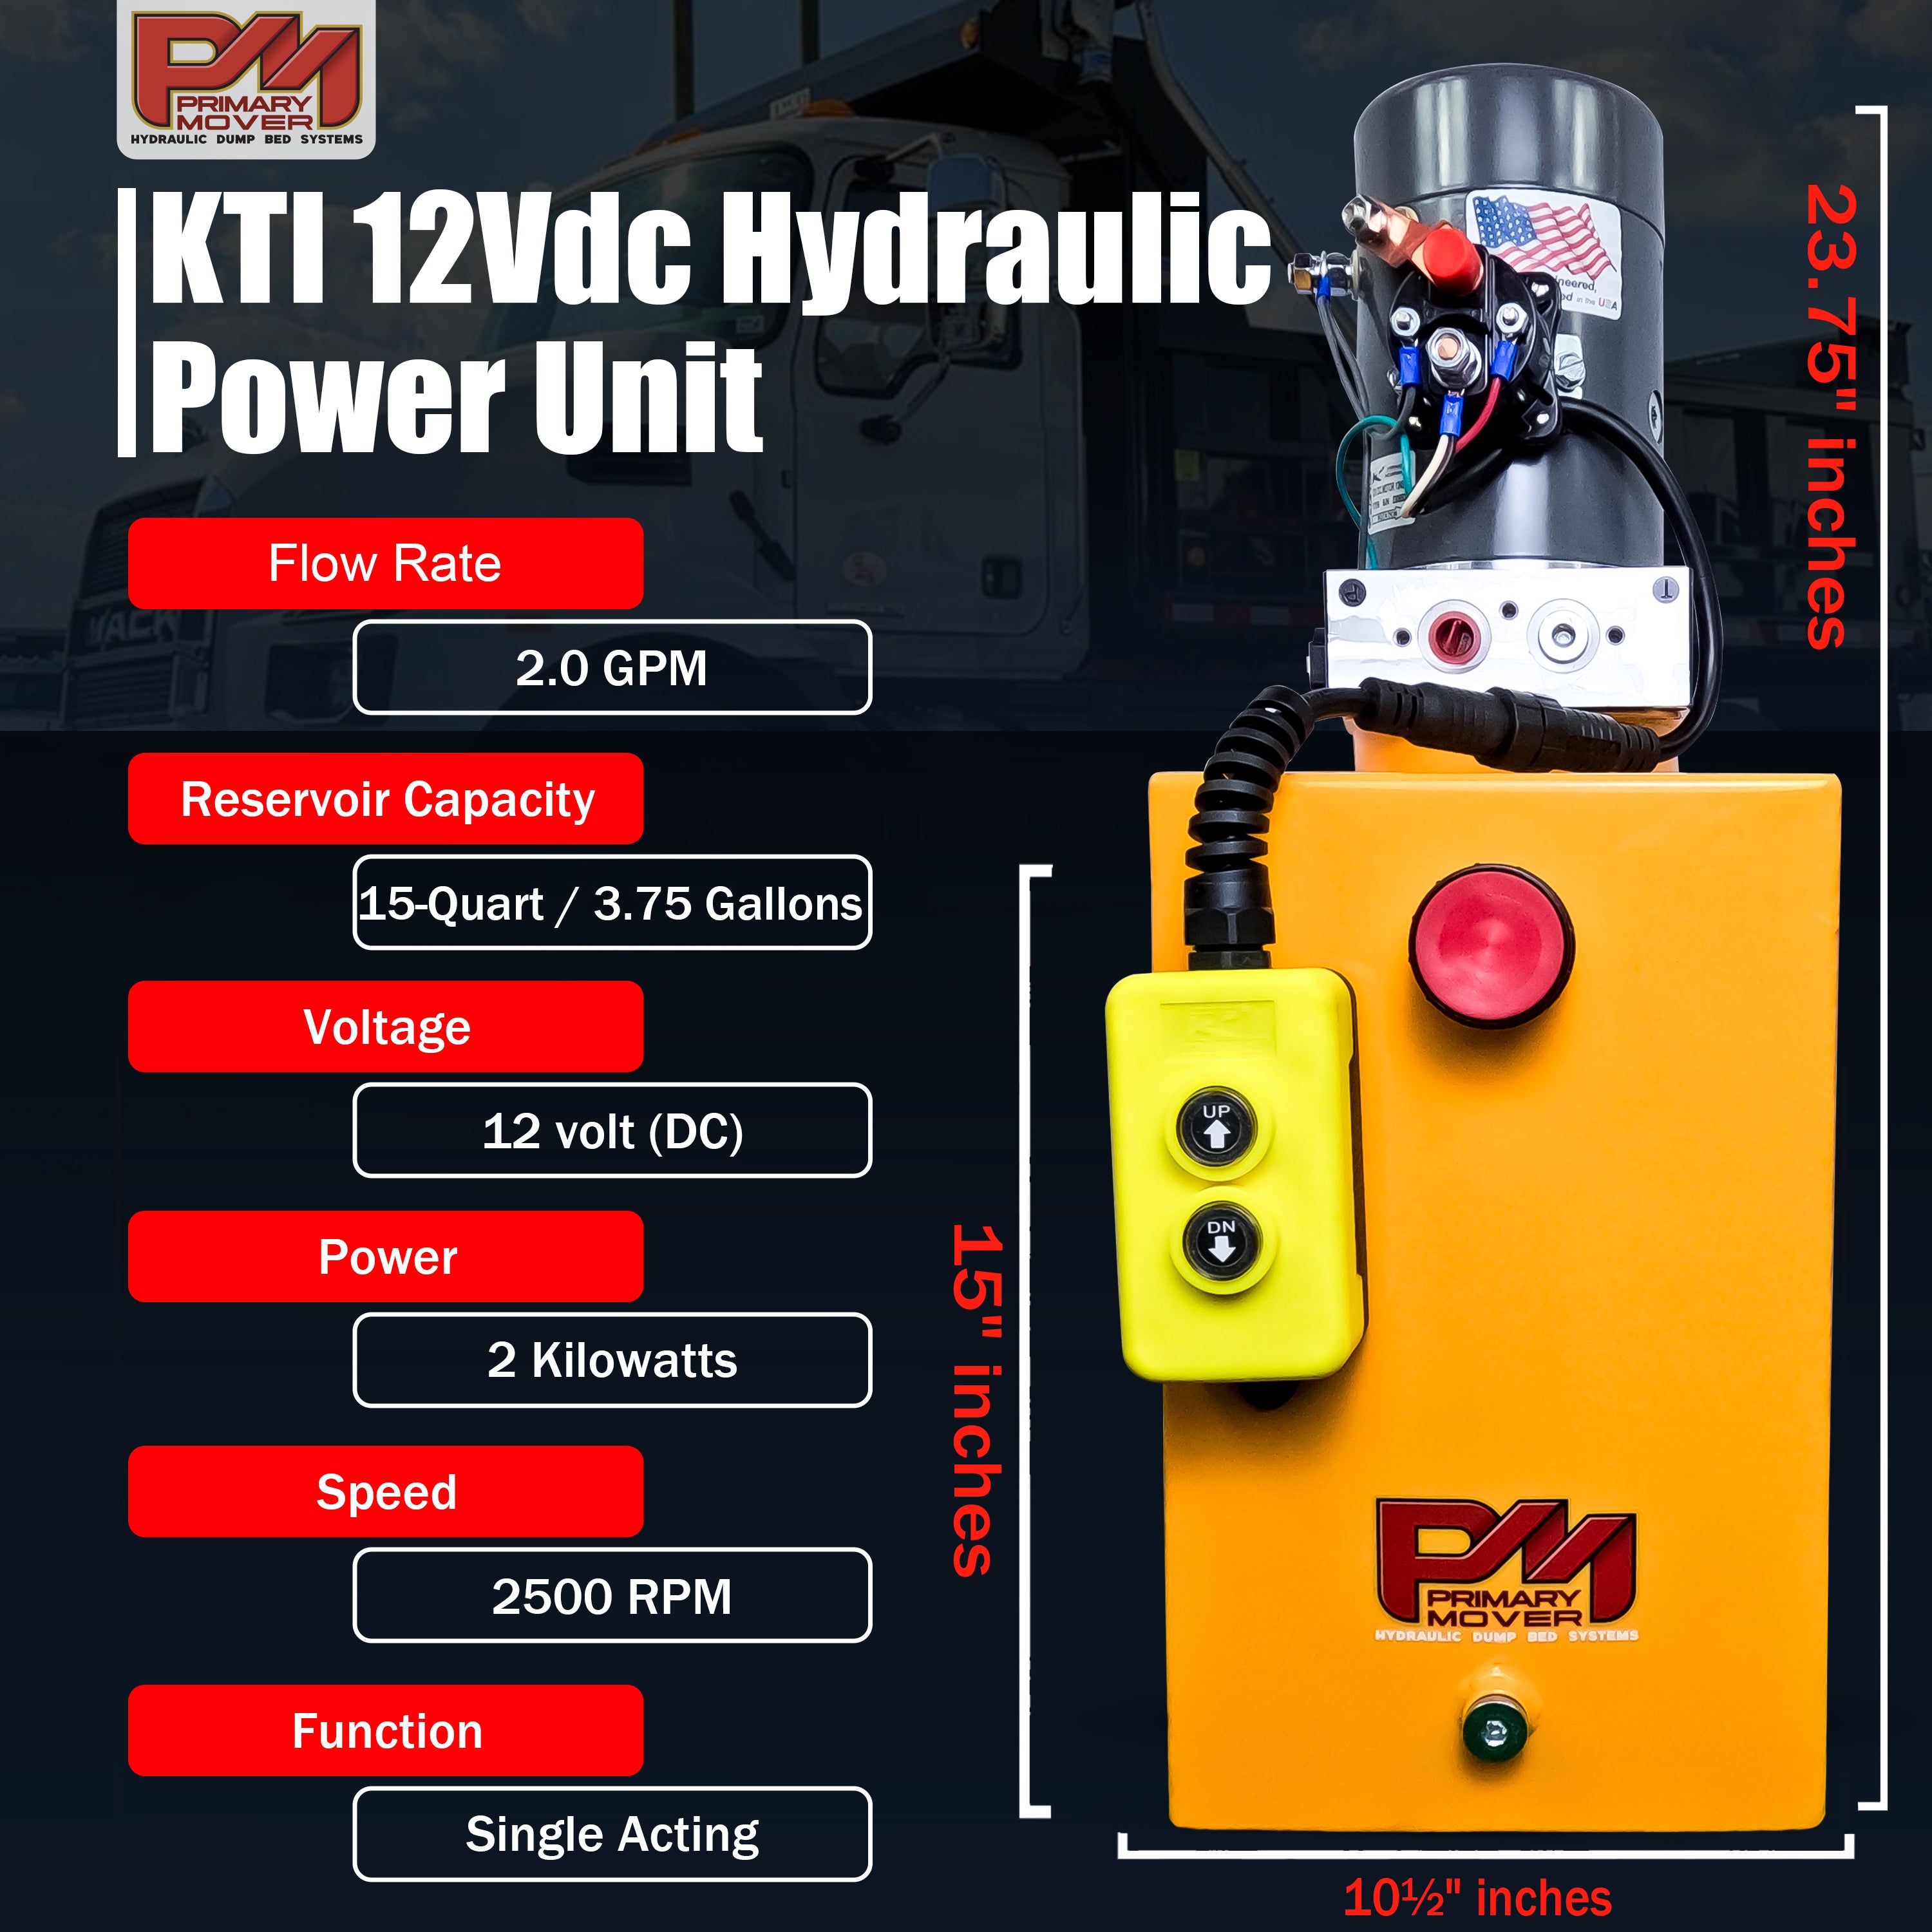 KTI 12V Single-Acting Hydraulic Pump - Steel Reservoir with control buttons, designed for efficient dump bed operation, featuring a compact and durable build for industrial use.